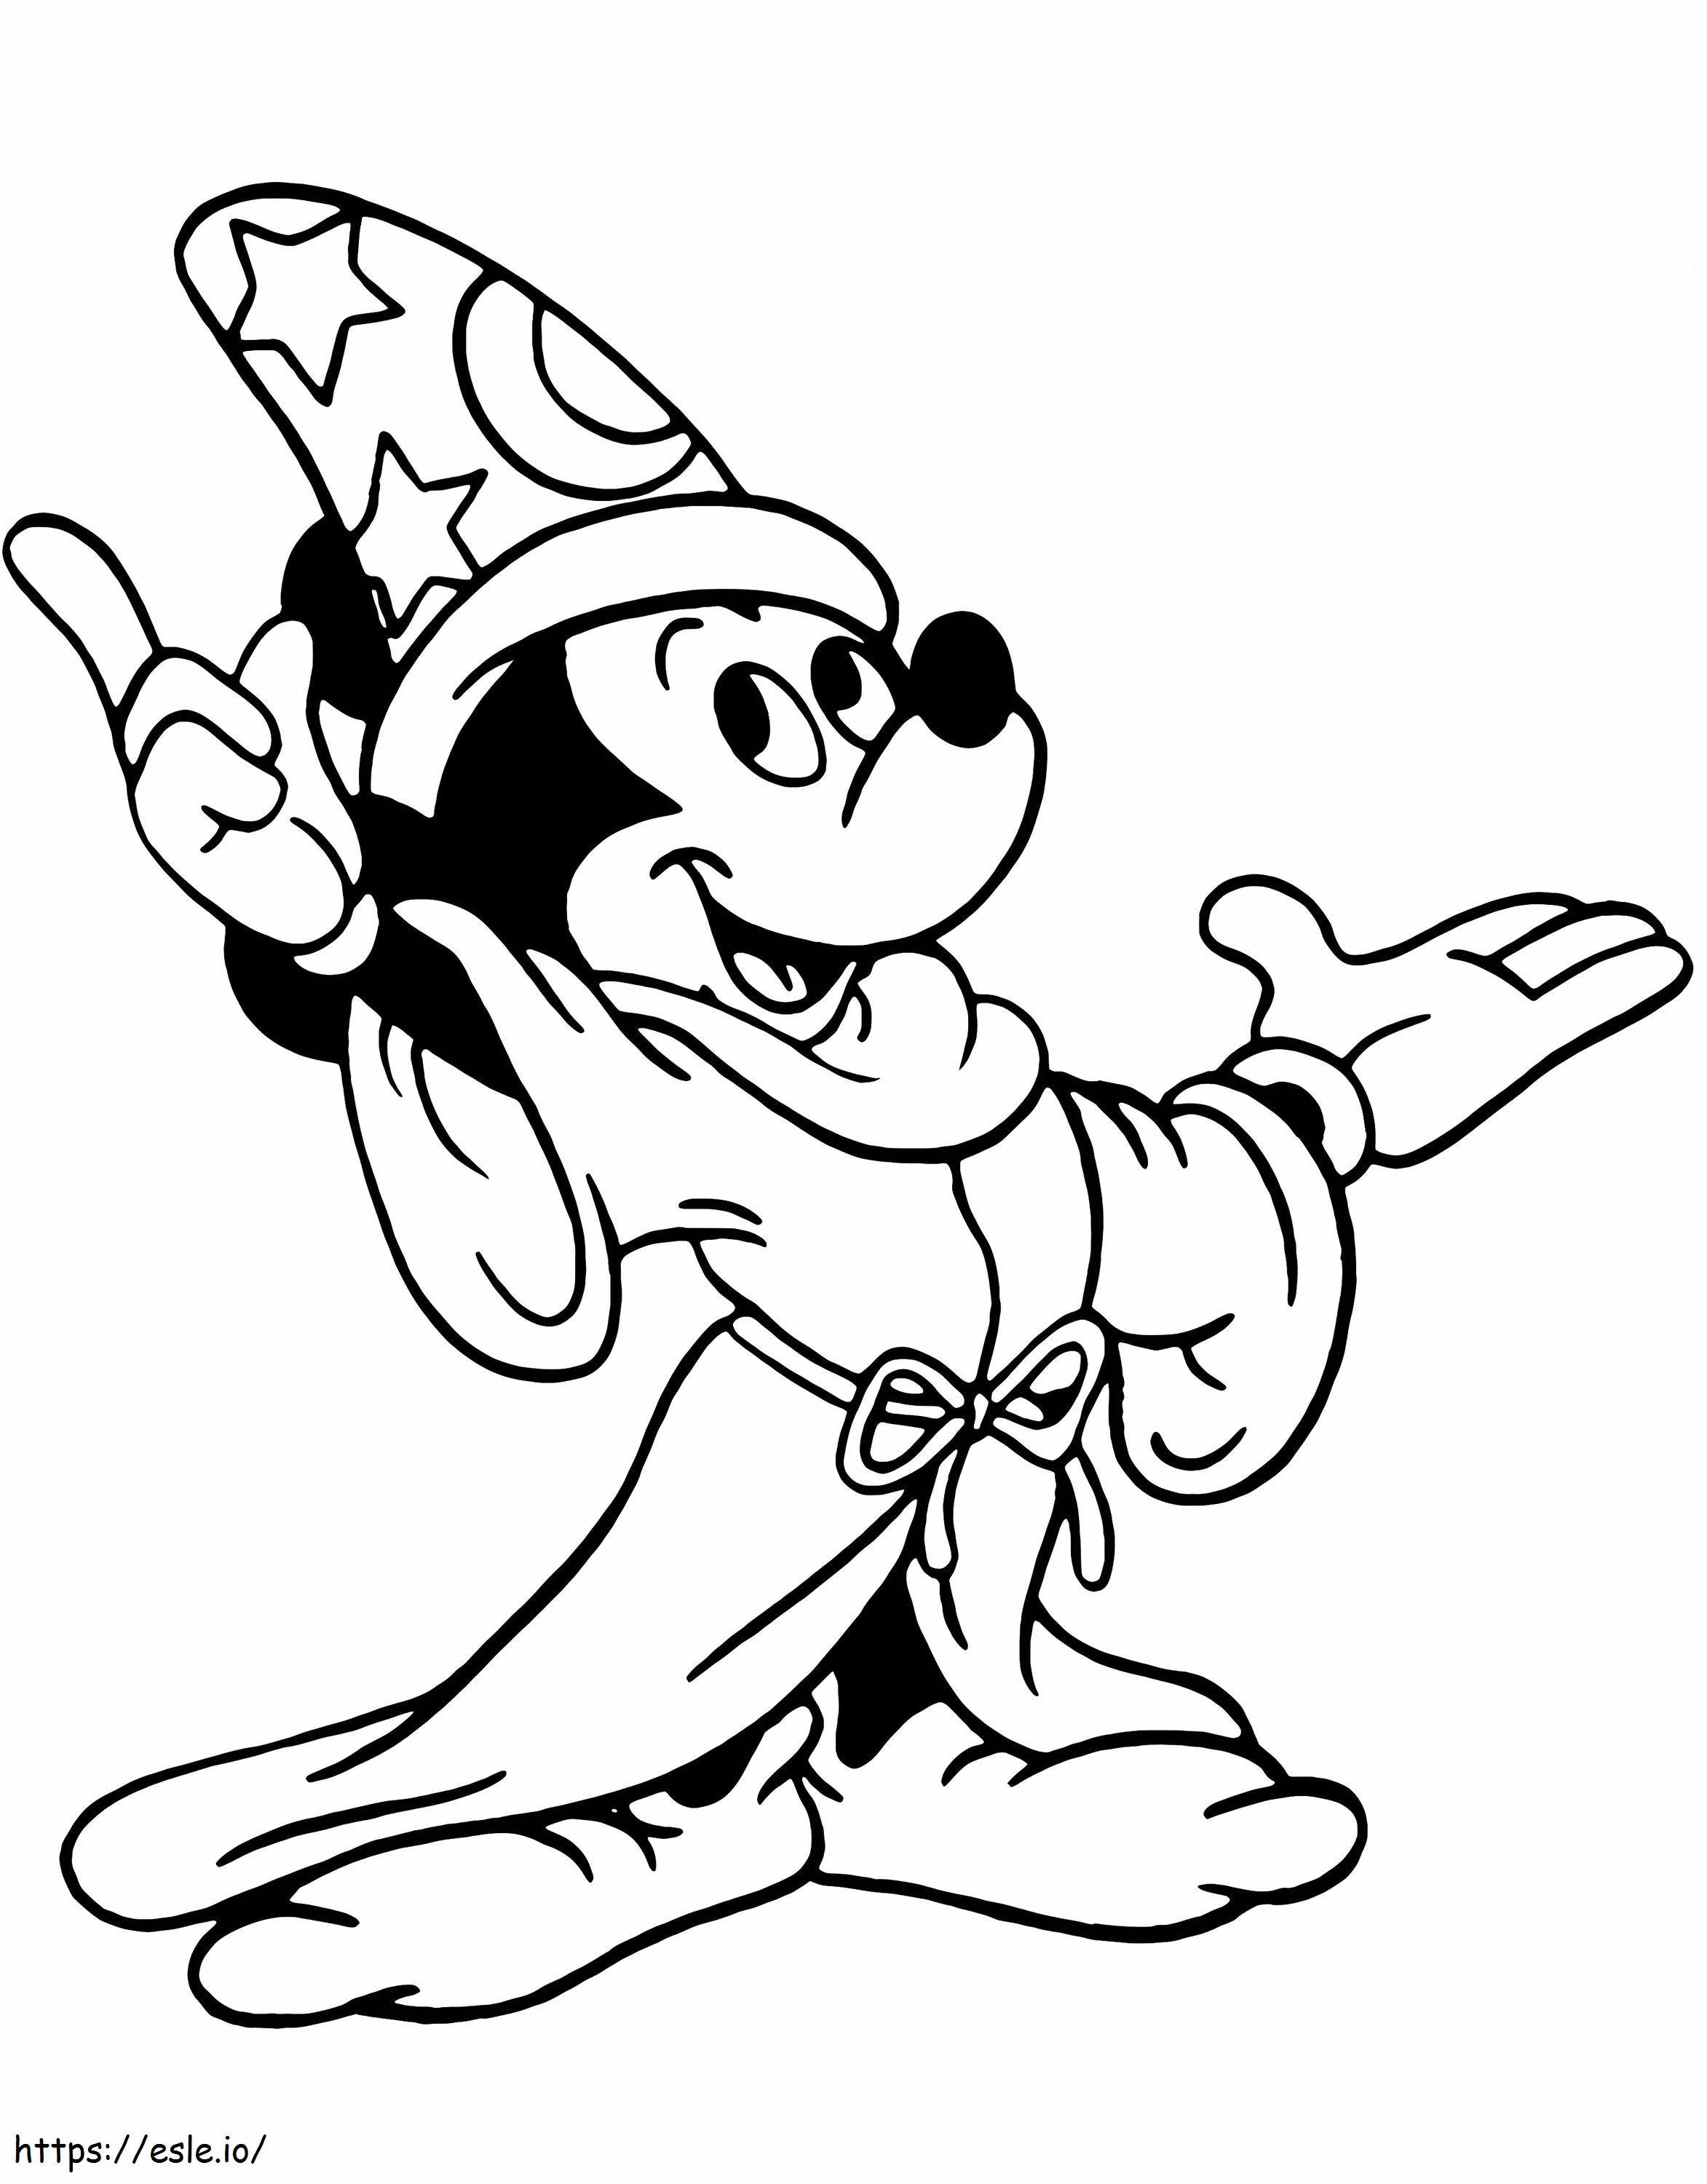 Fantasia Coloring2 coloring page